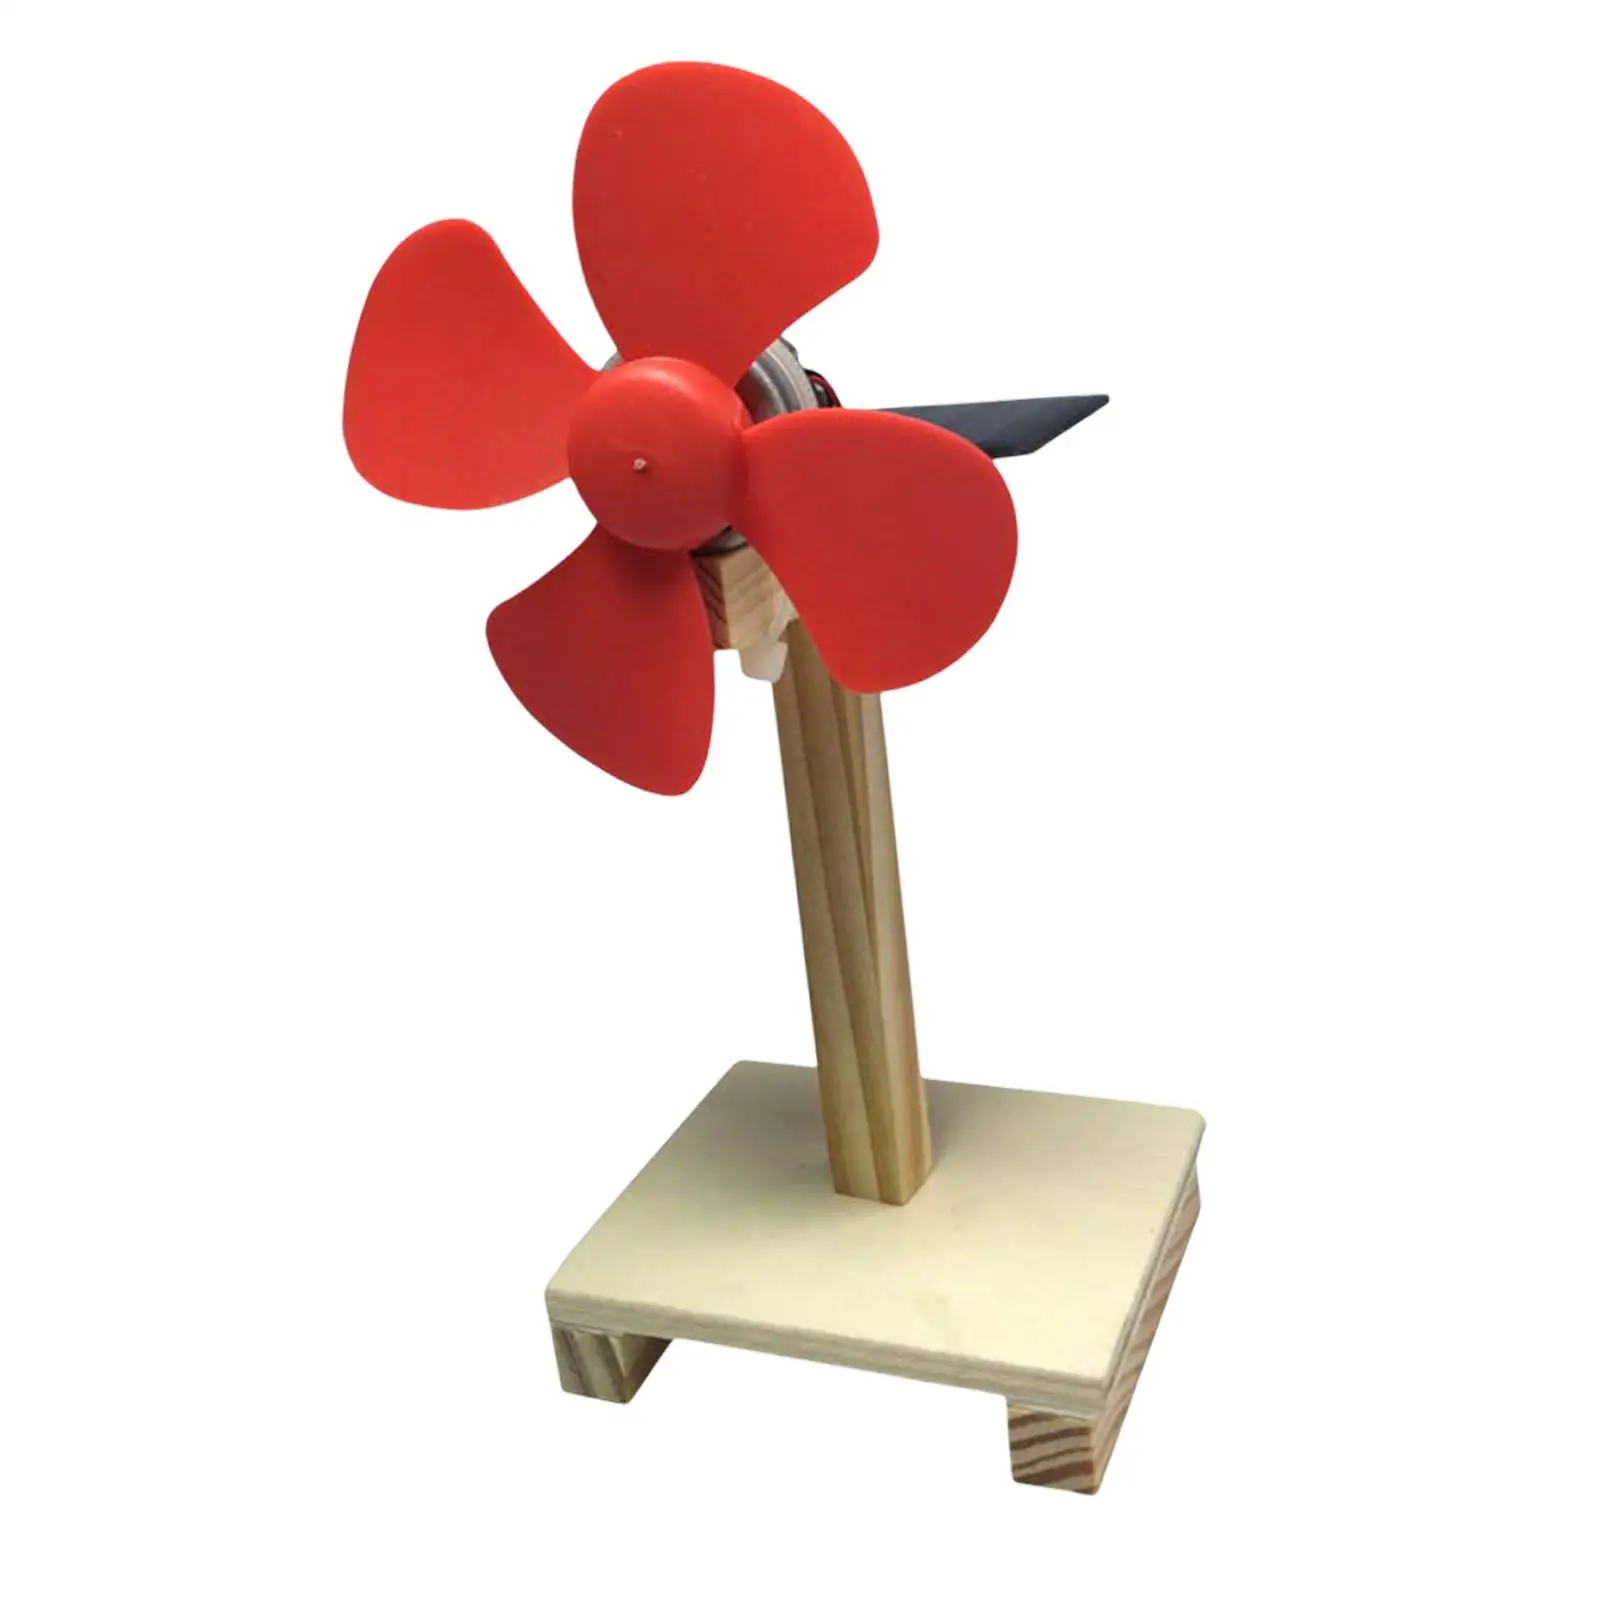 

Wooden Solar Fan Stem Kits Educational Creative Craft Kits science Study Exploring The Principle Gift Interaction Learning